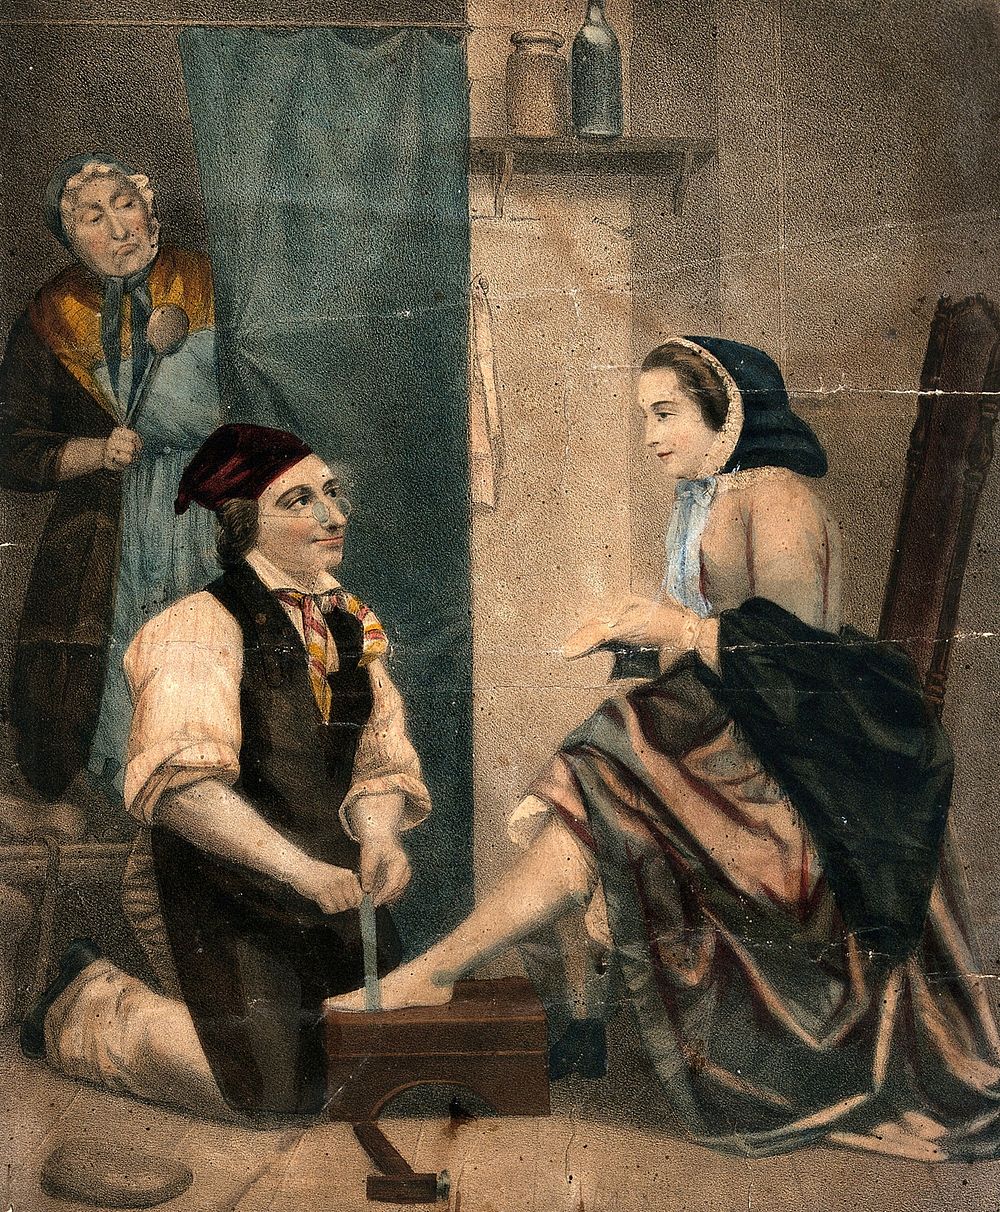 A shoemaker measures up the feet of a young woman who is sitting on a chair holding a shoe in her hand; they exchange looks…